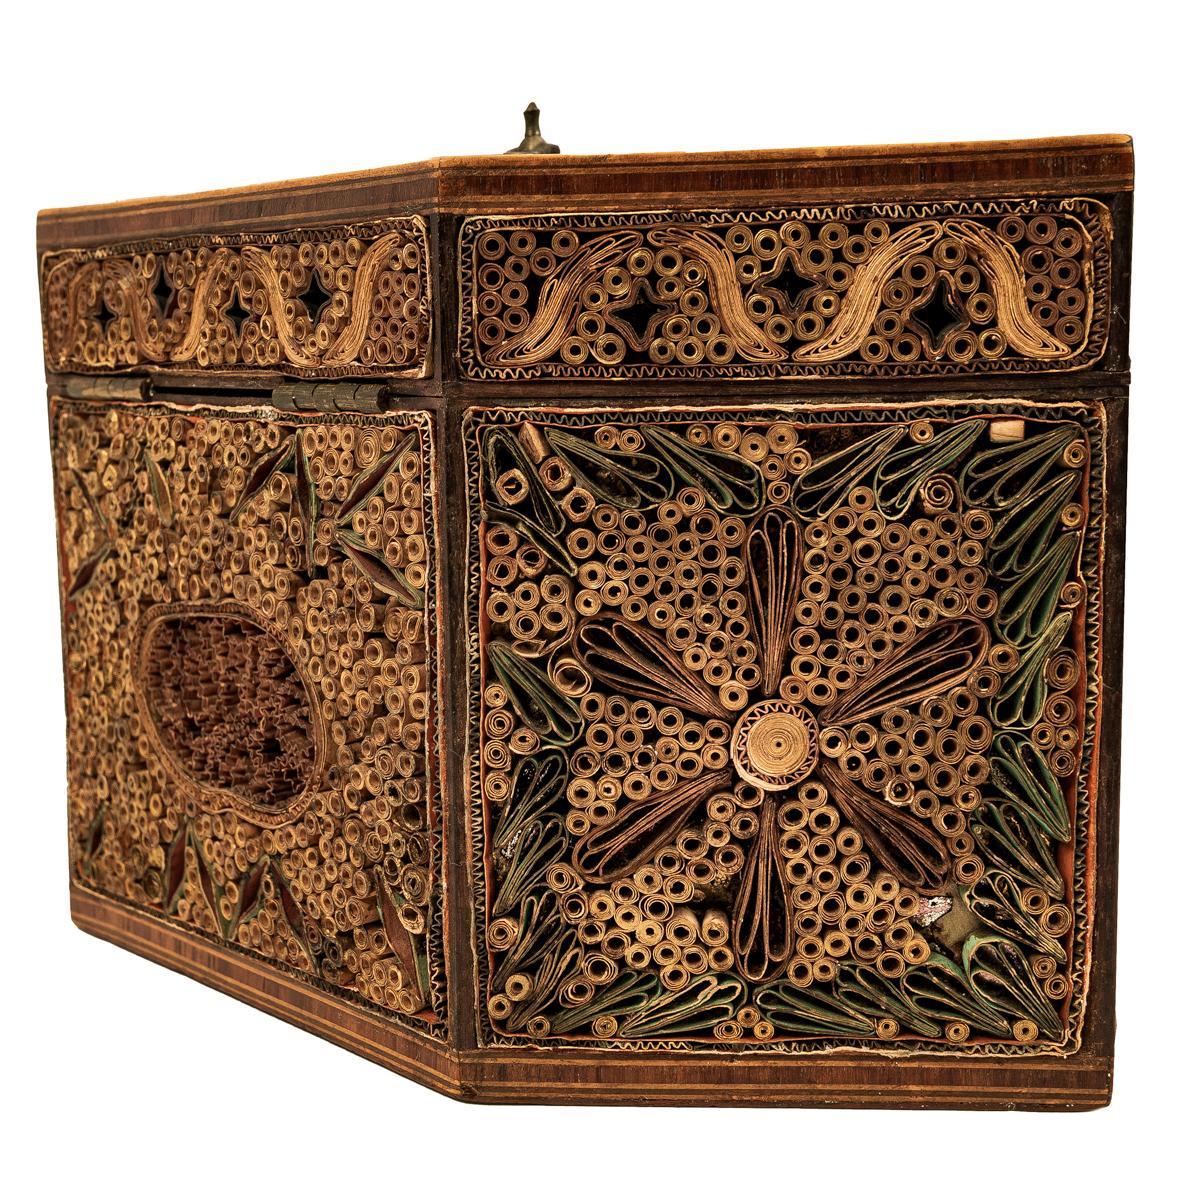 Antique 18th Century Georgian Mahoghany Paper Scroll Work Tea Caddy Box 1780 In Good Condition For Sale In Portland, OR